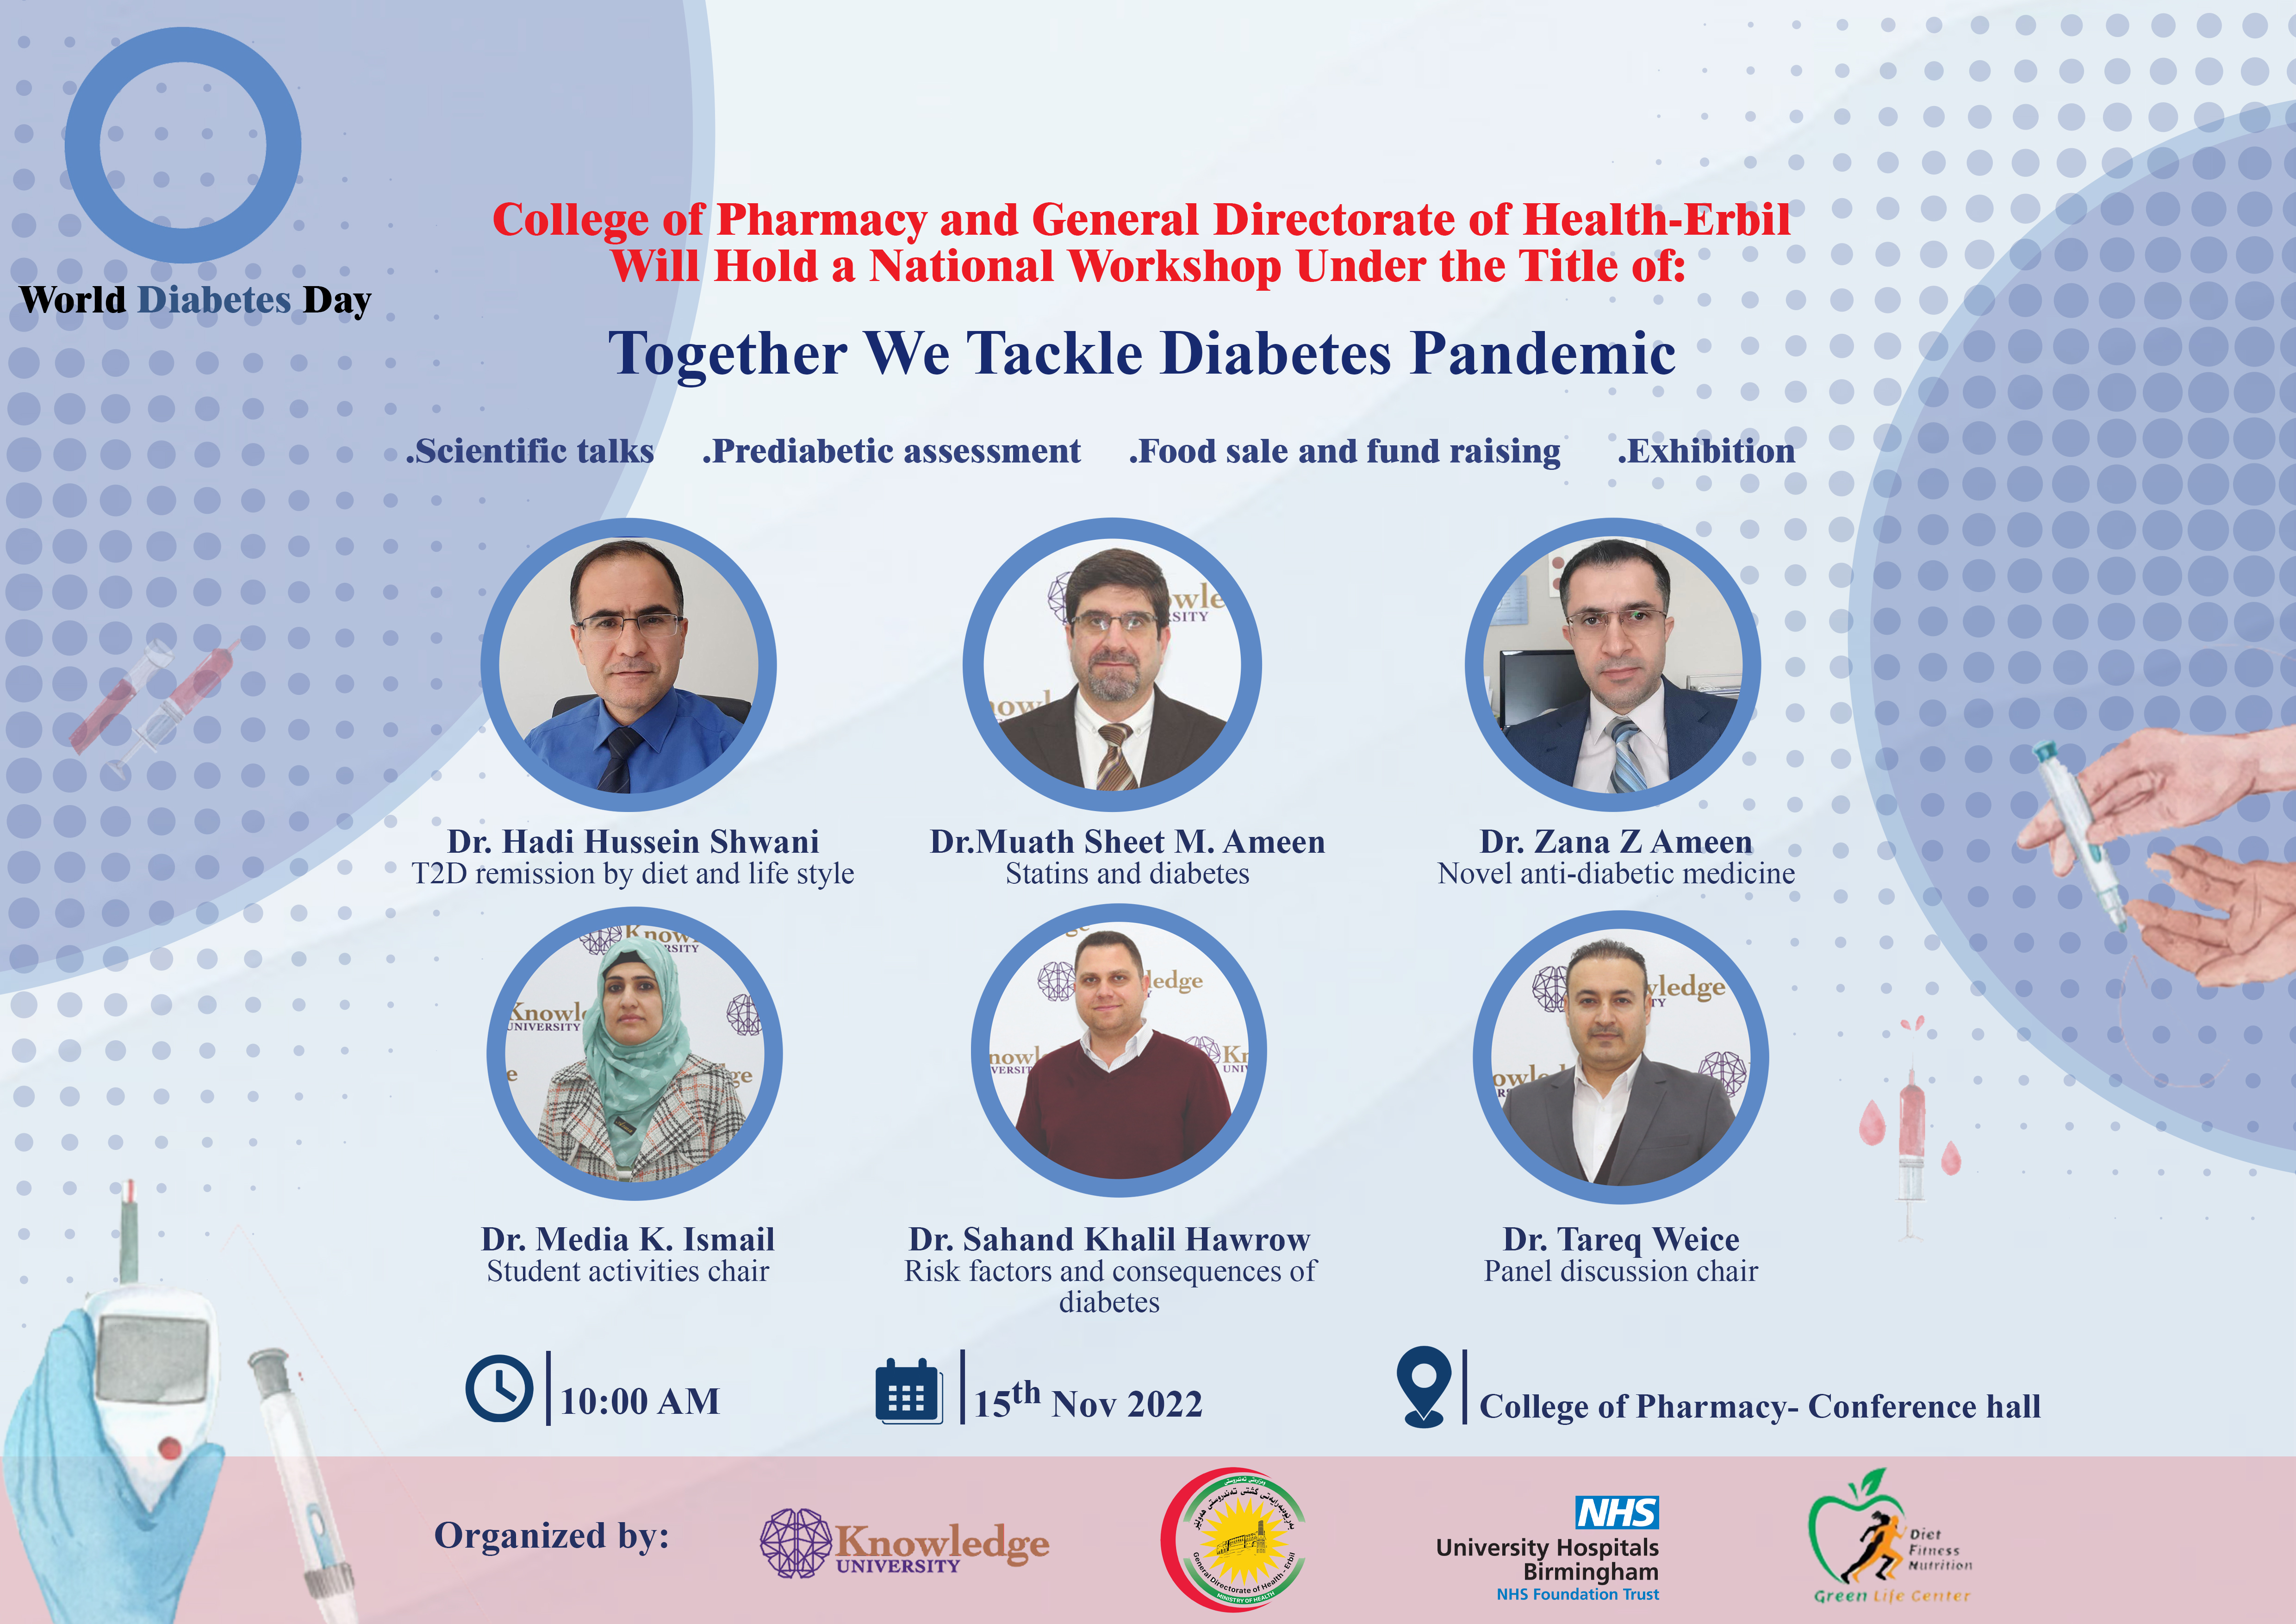  Knowledge University will hold a National workshop under the title of (Together we tackle Diabetes pandemic).